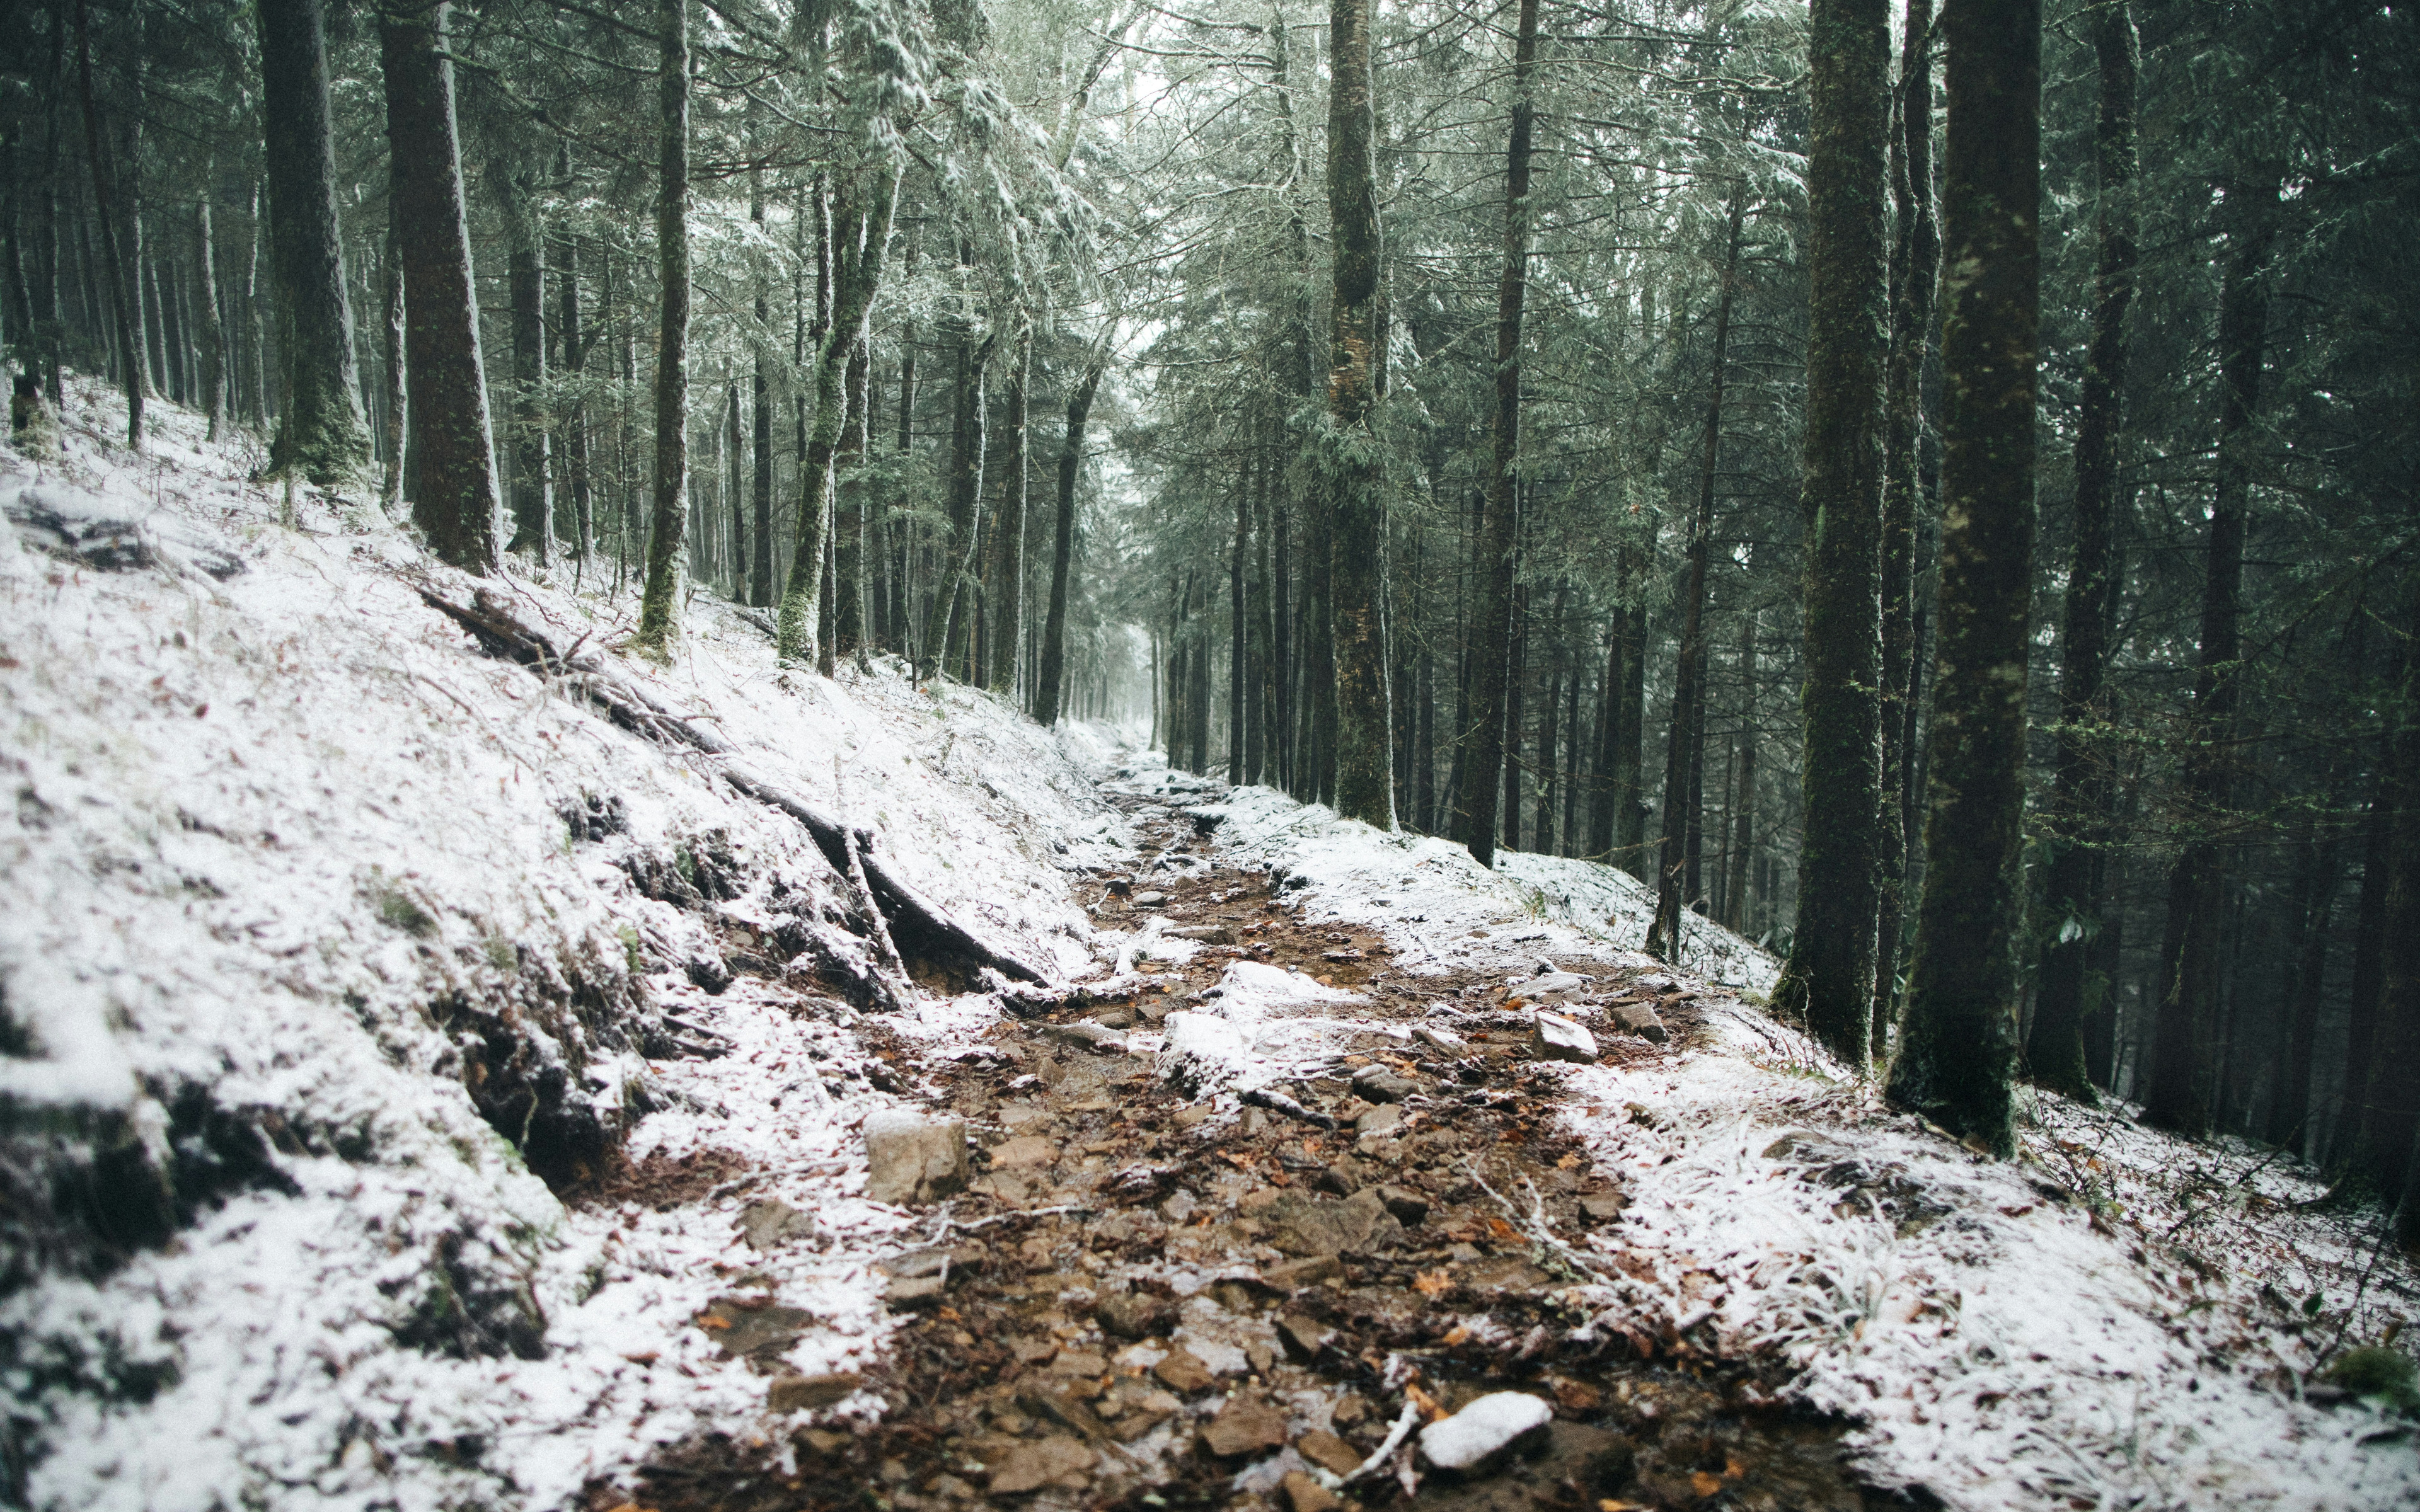 General 3840x2400 nature trees snow dirt road forest winter rocks Great Smoky Mountains USA Wes Hicks